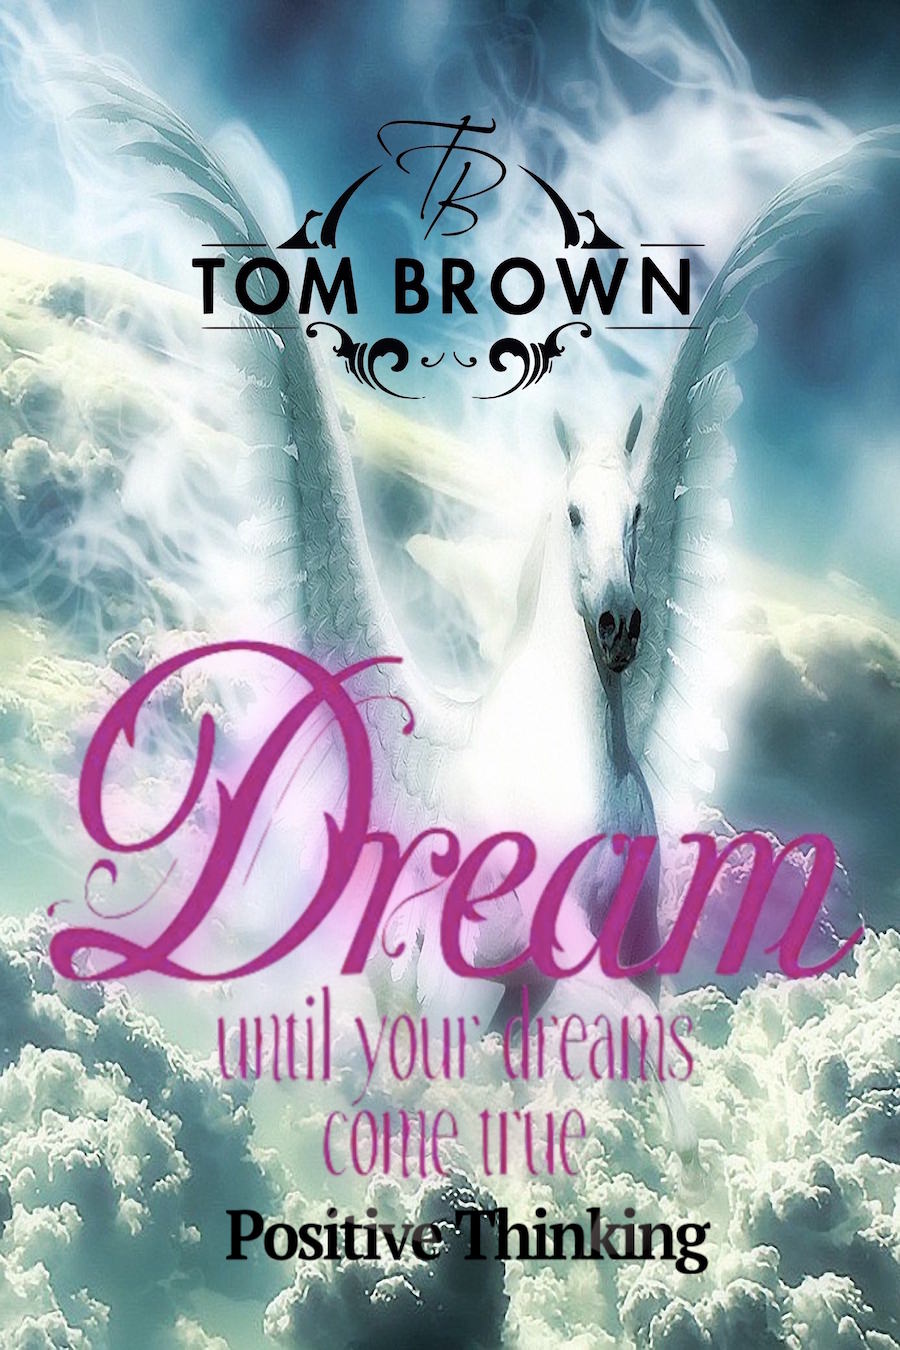 FREE: Make Your Dreams Come True (Positive Thinking Book): How to Be Happy, Goal Setting, Self Esteem, How of Happiness by Tom Brown